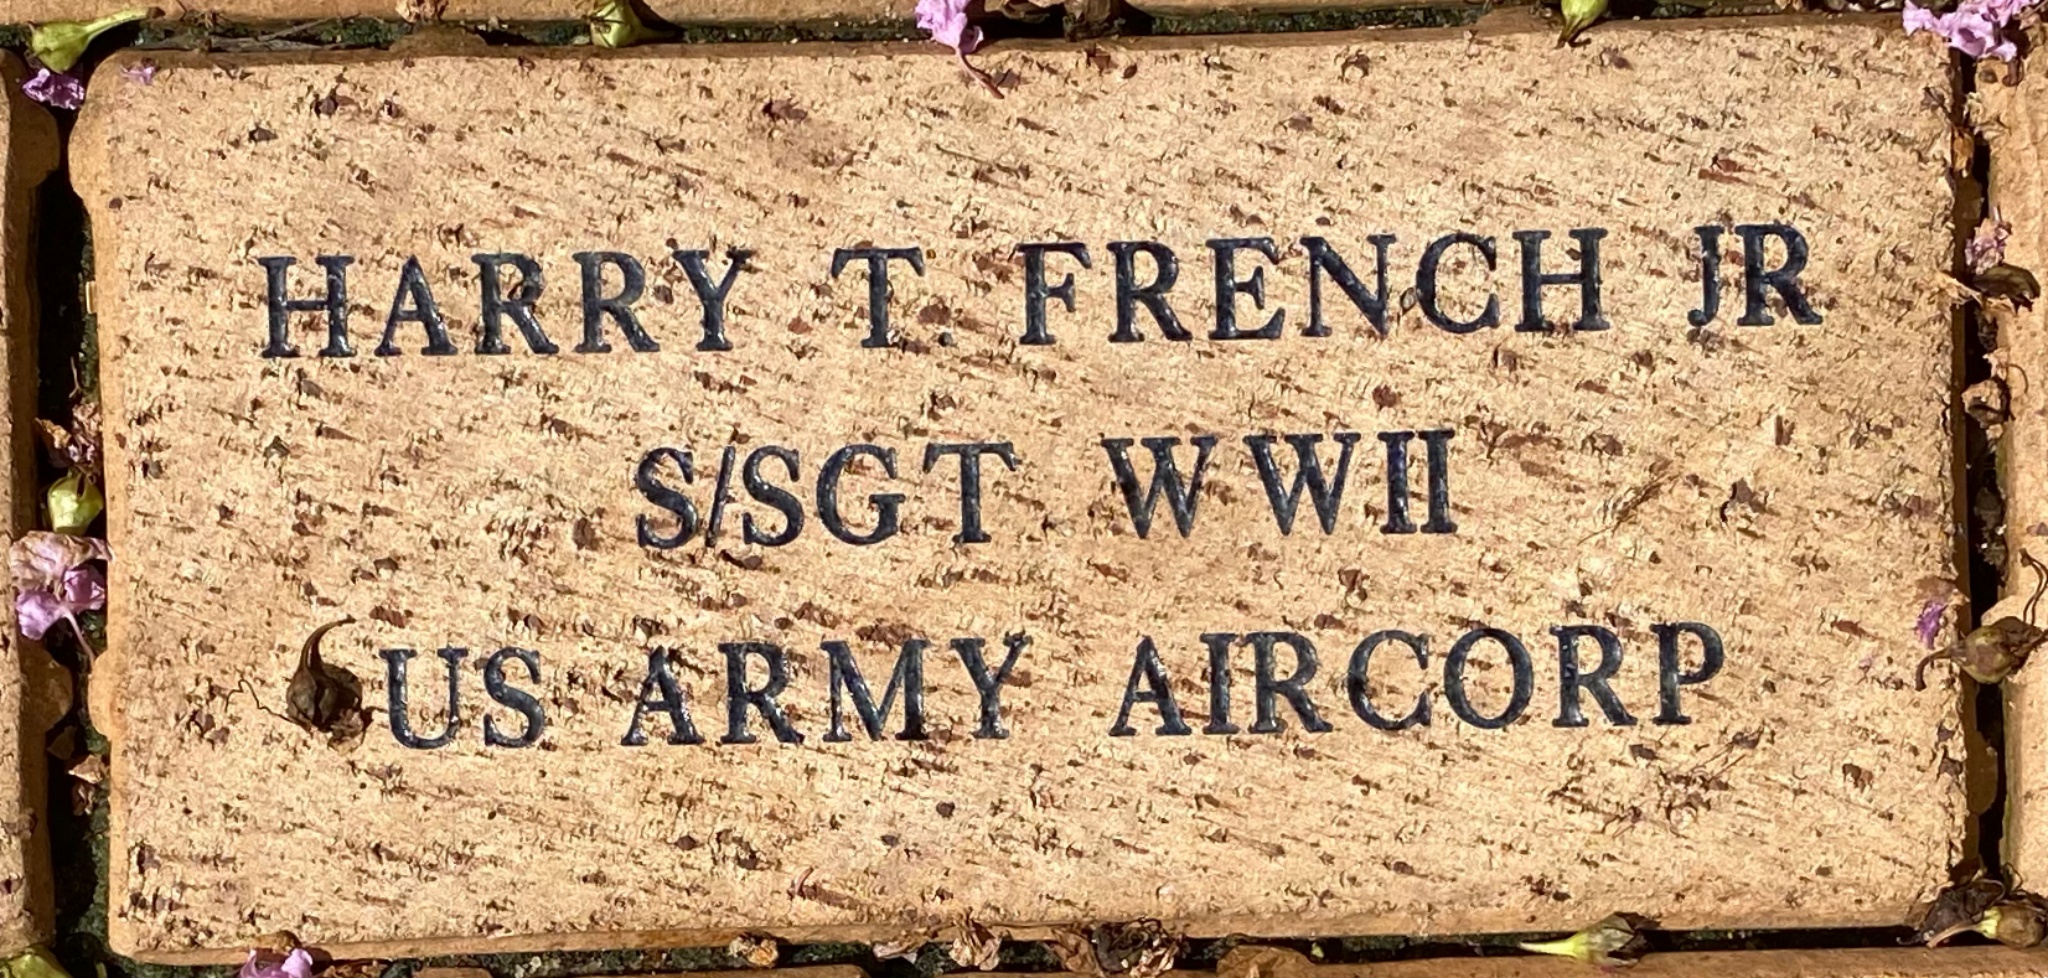 HARRY T. FRENCH JR S/SGT WWII US ARMY AIRCORP